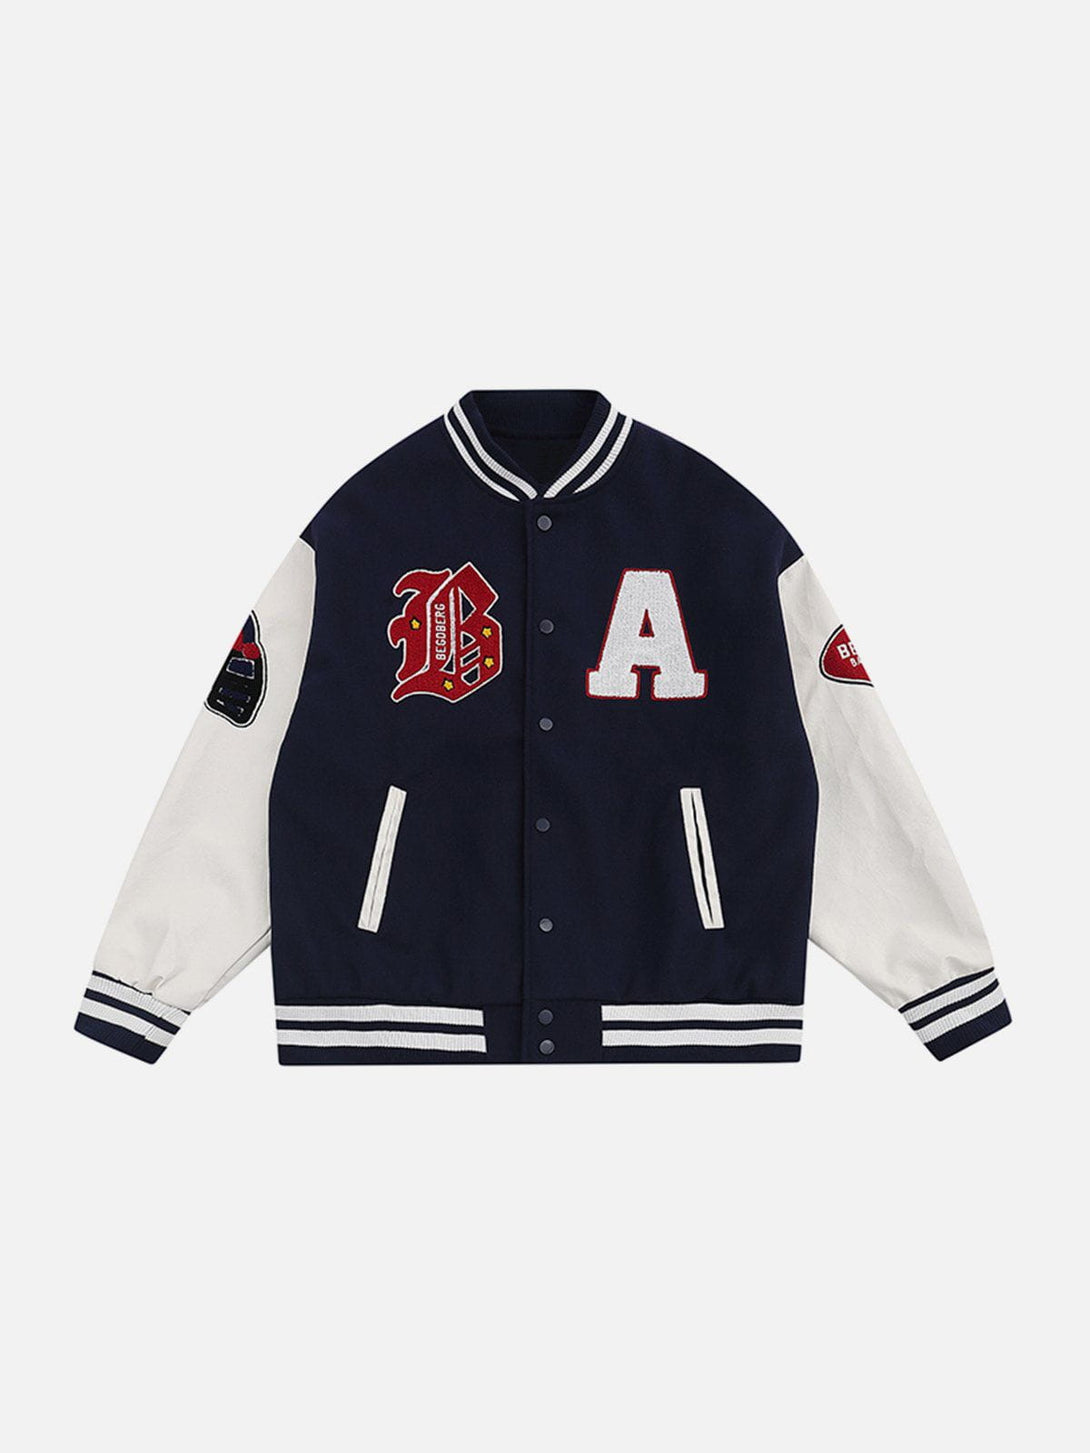 Ellesey - A Embroidery Varsity Jacket- Streetwear Fashion - ellesey.com